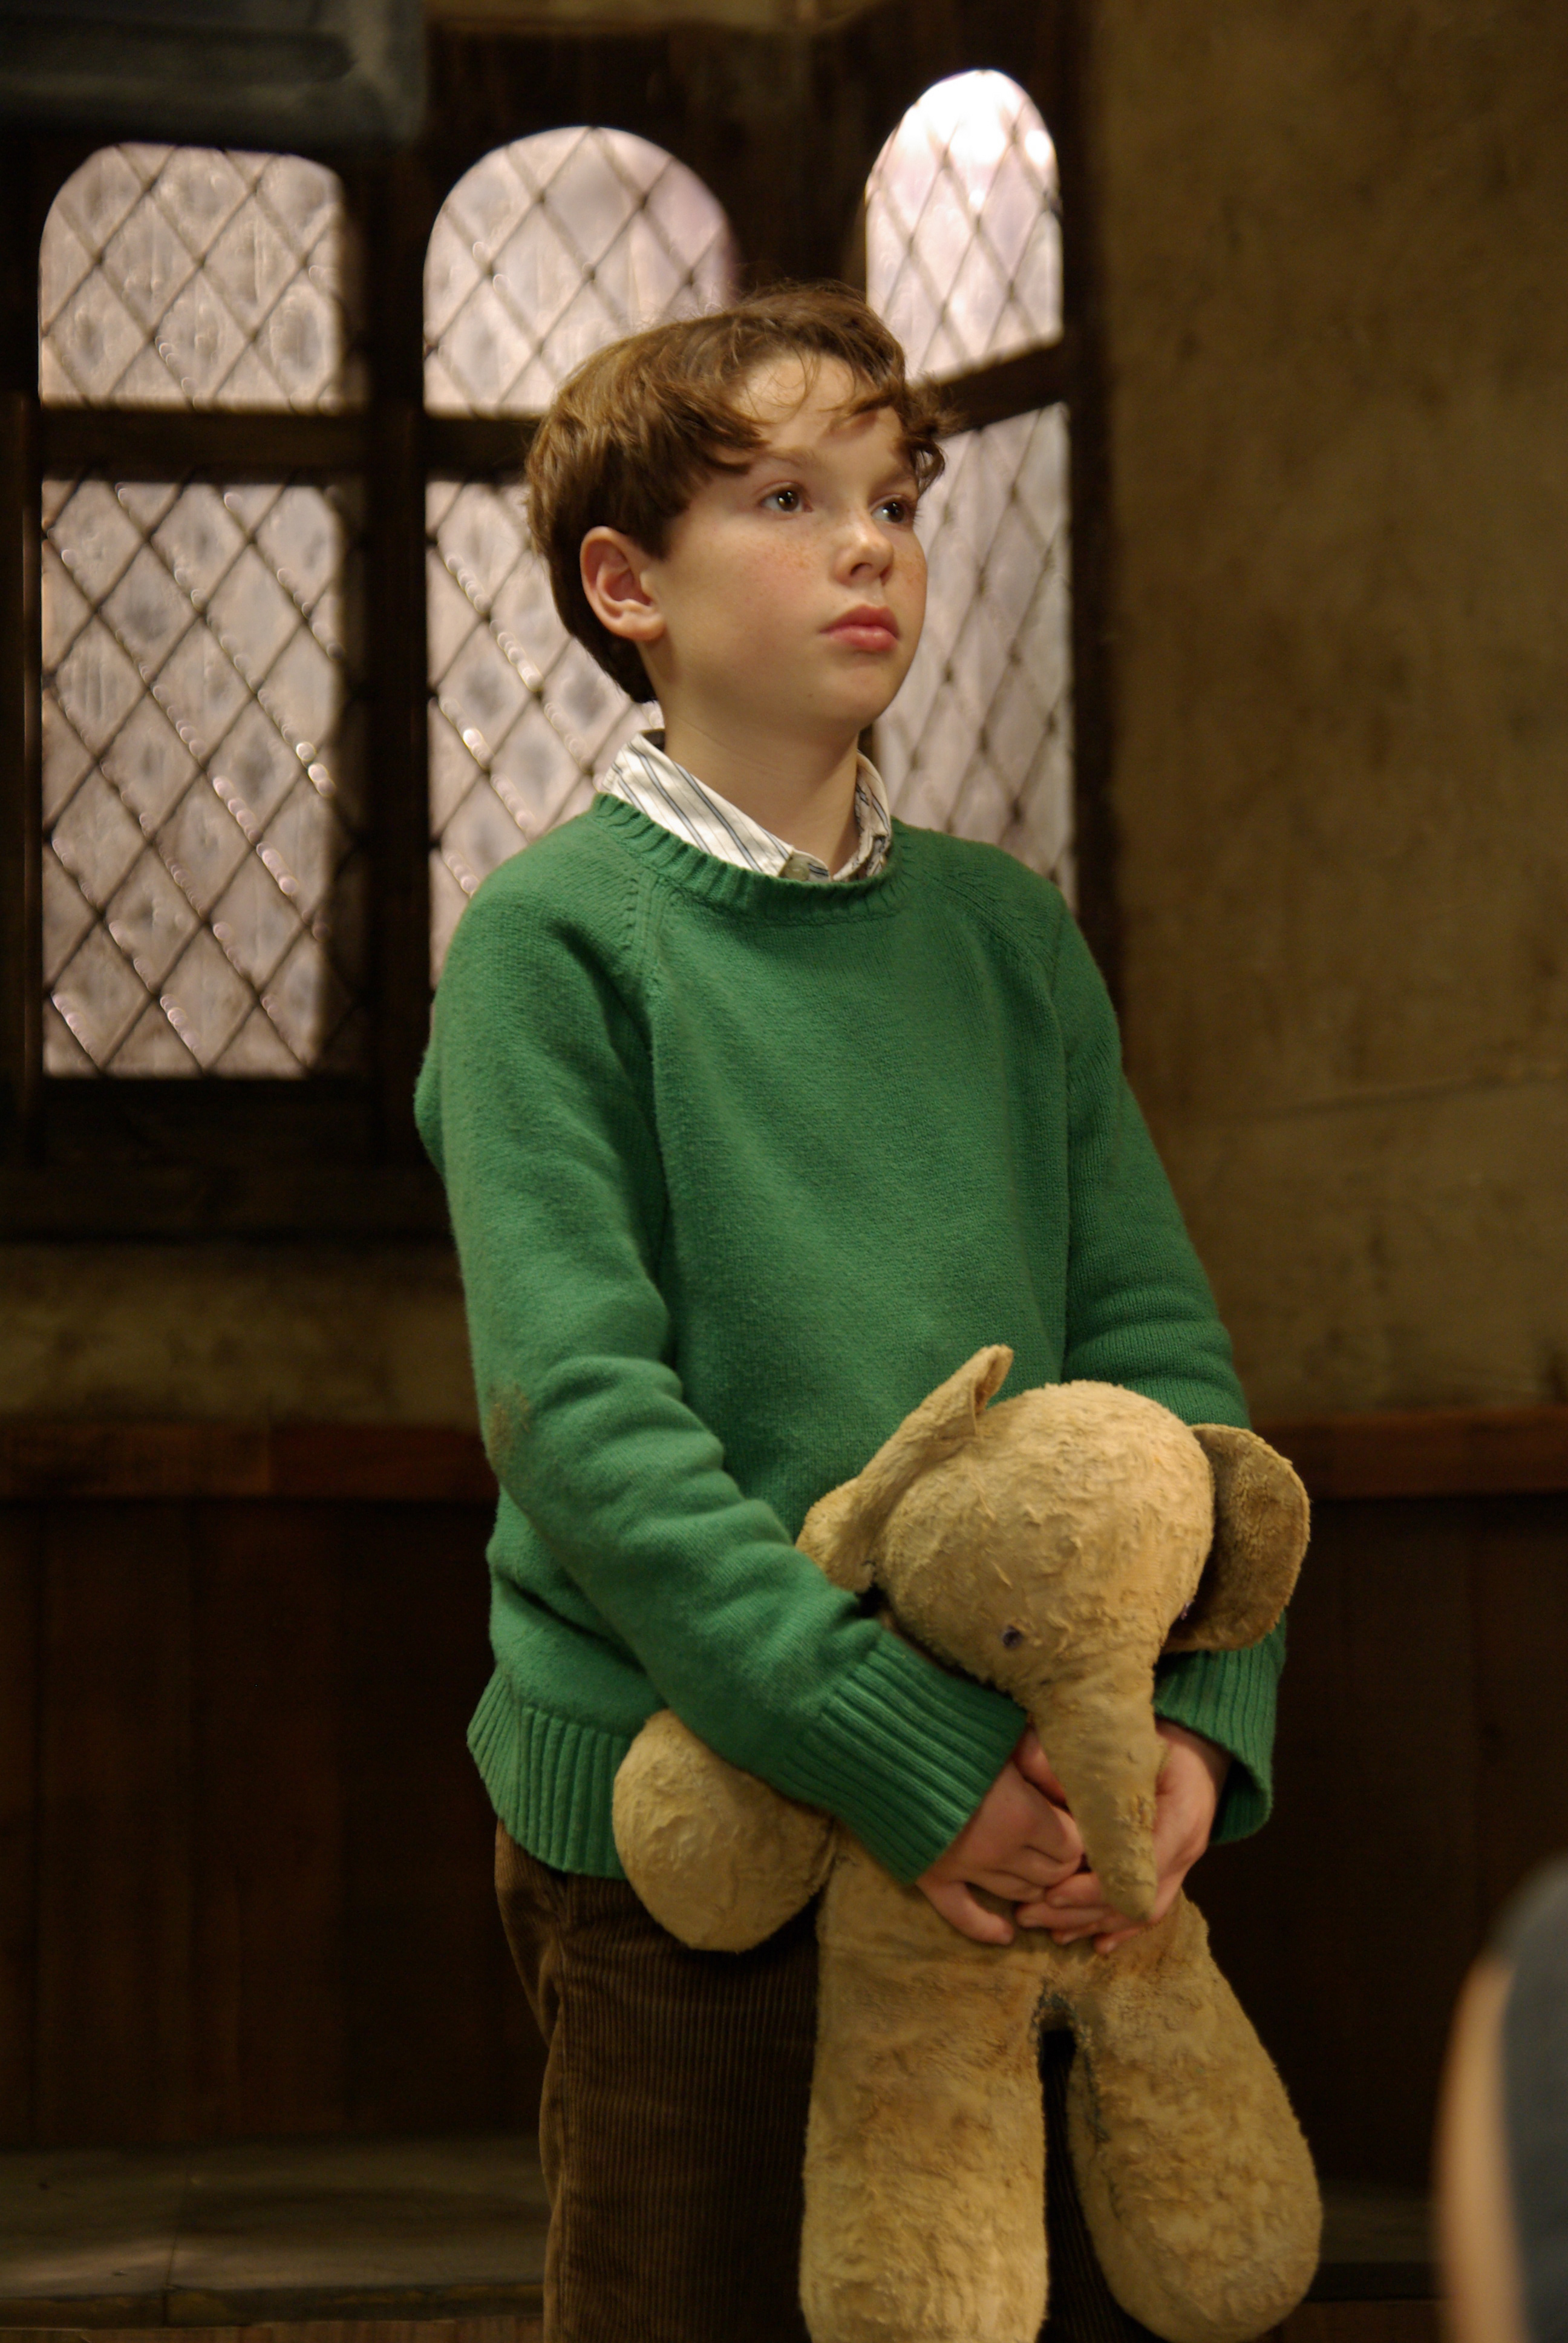 Jarrod as Michael holding his beloved toy Jacob in The Obolus, Dec. 2007.